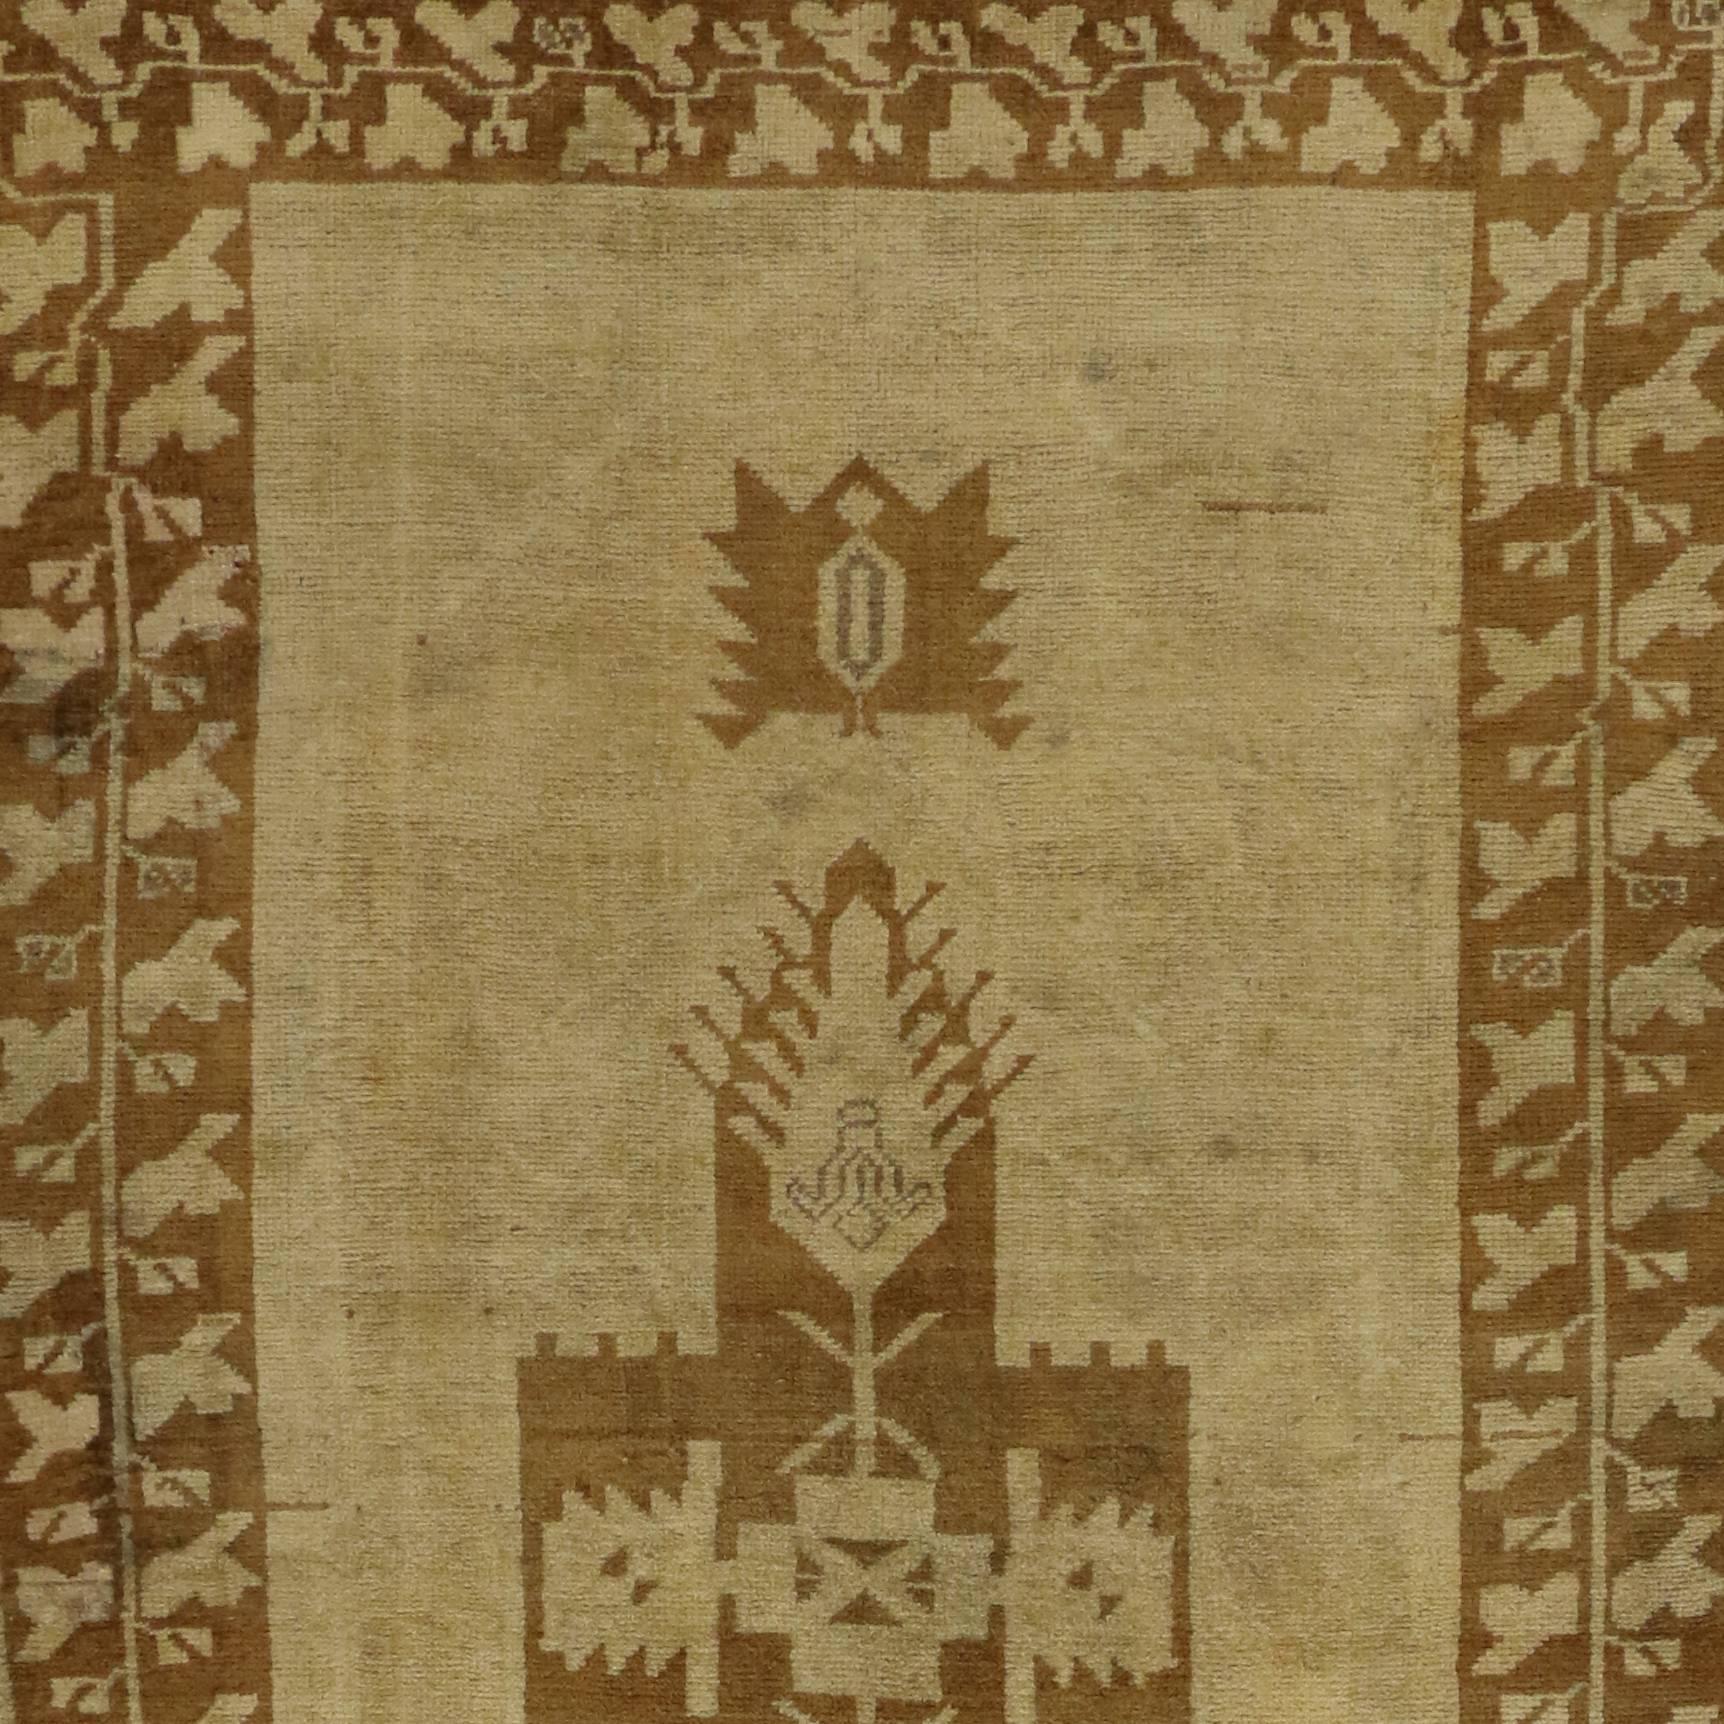 Vintage Turkish Oushak Runner with Warm, Neutral Colors, Hallway Runner For Sale 4